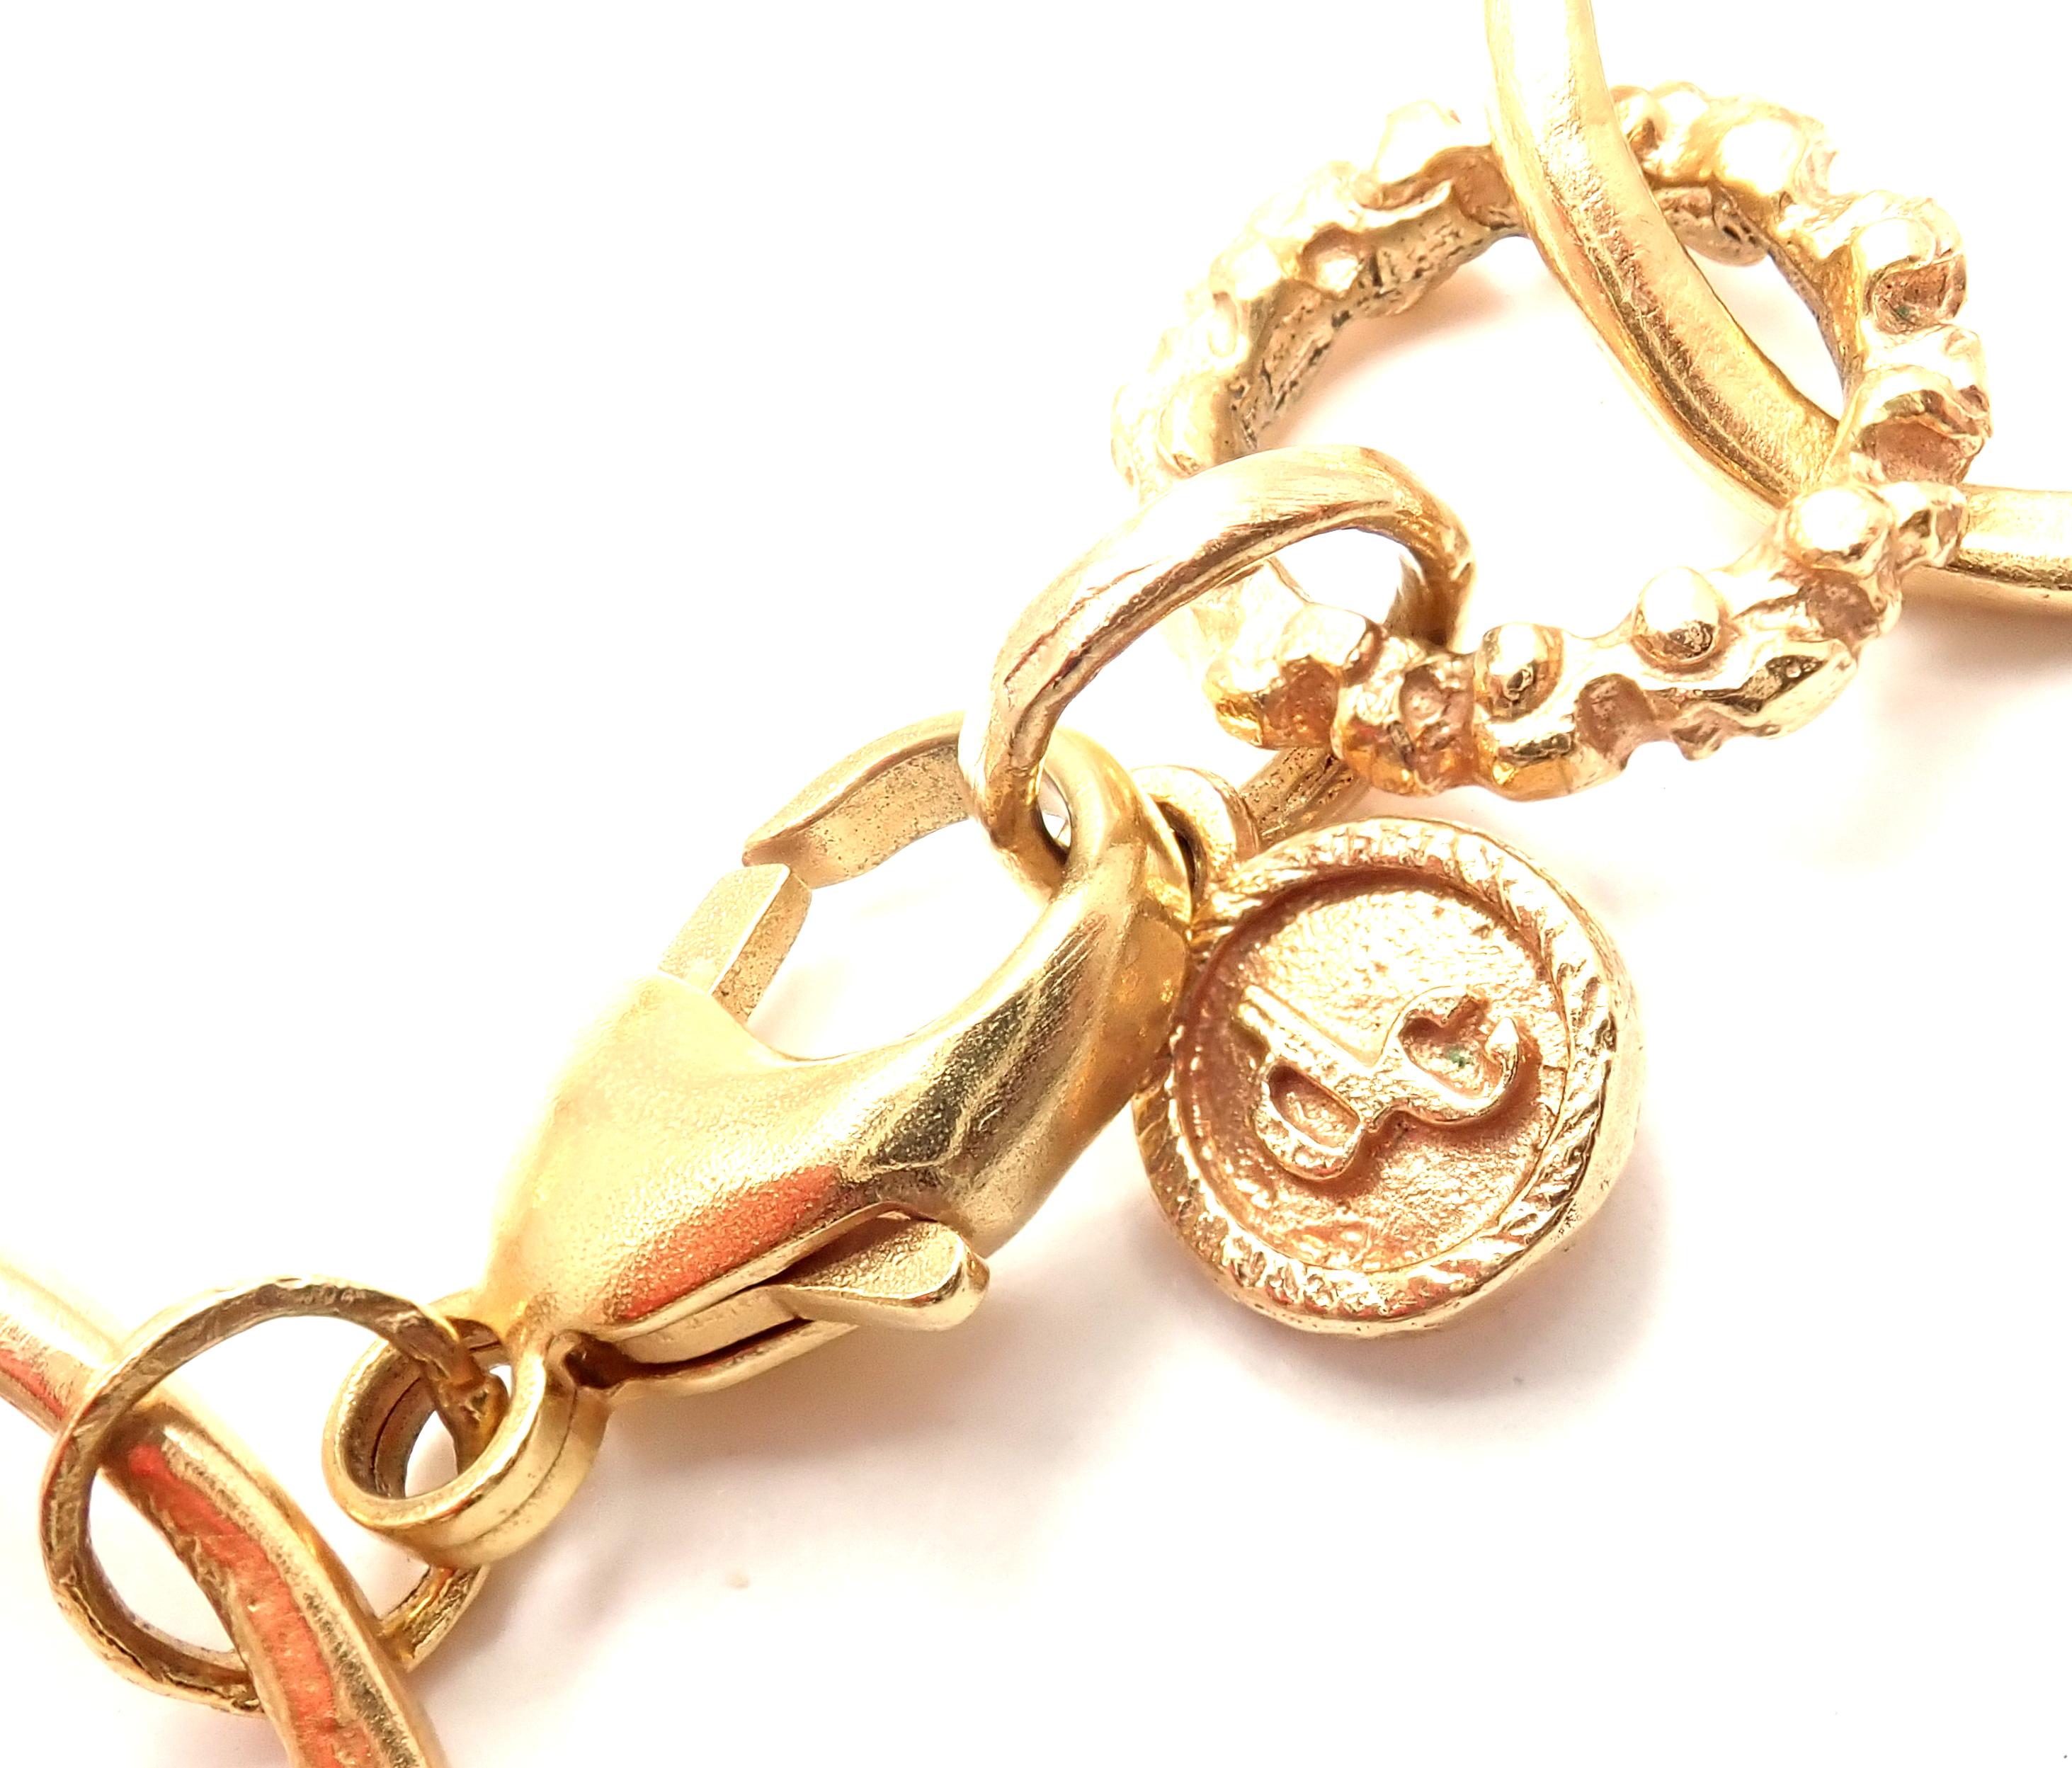 18k Yellow Gold Link Buddha Bracelet by Dominique Cohen.
Retail Price: $6,200
Details: 
Weight: 37.7 grams
Length: 8